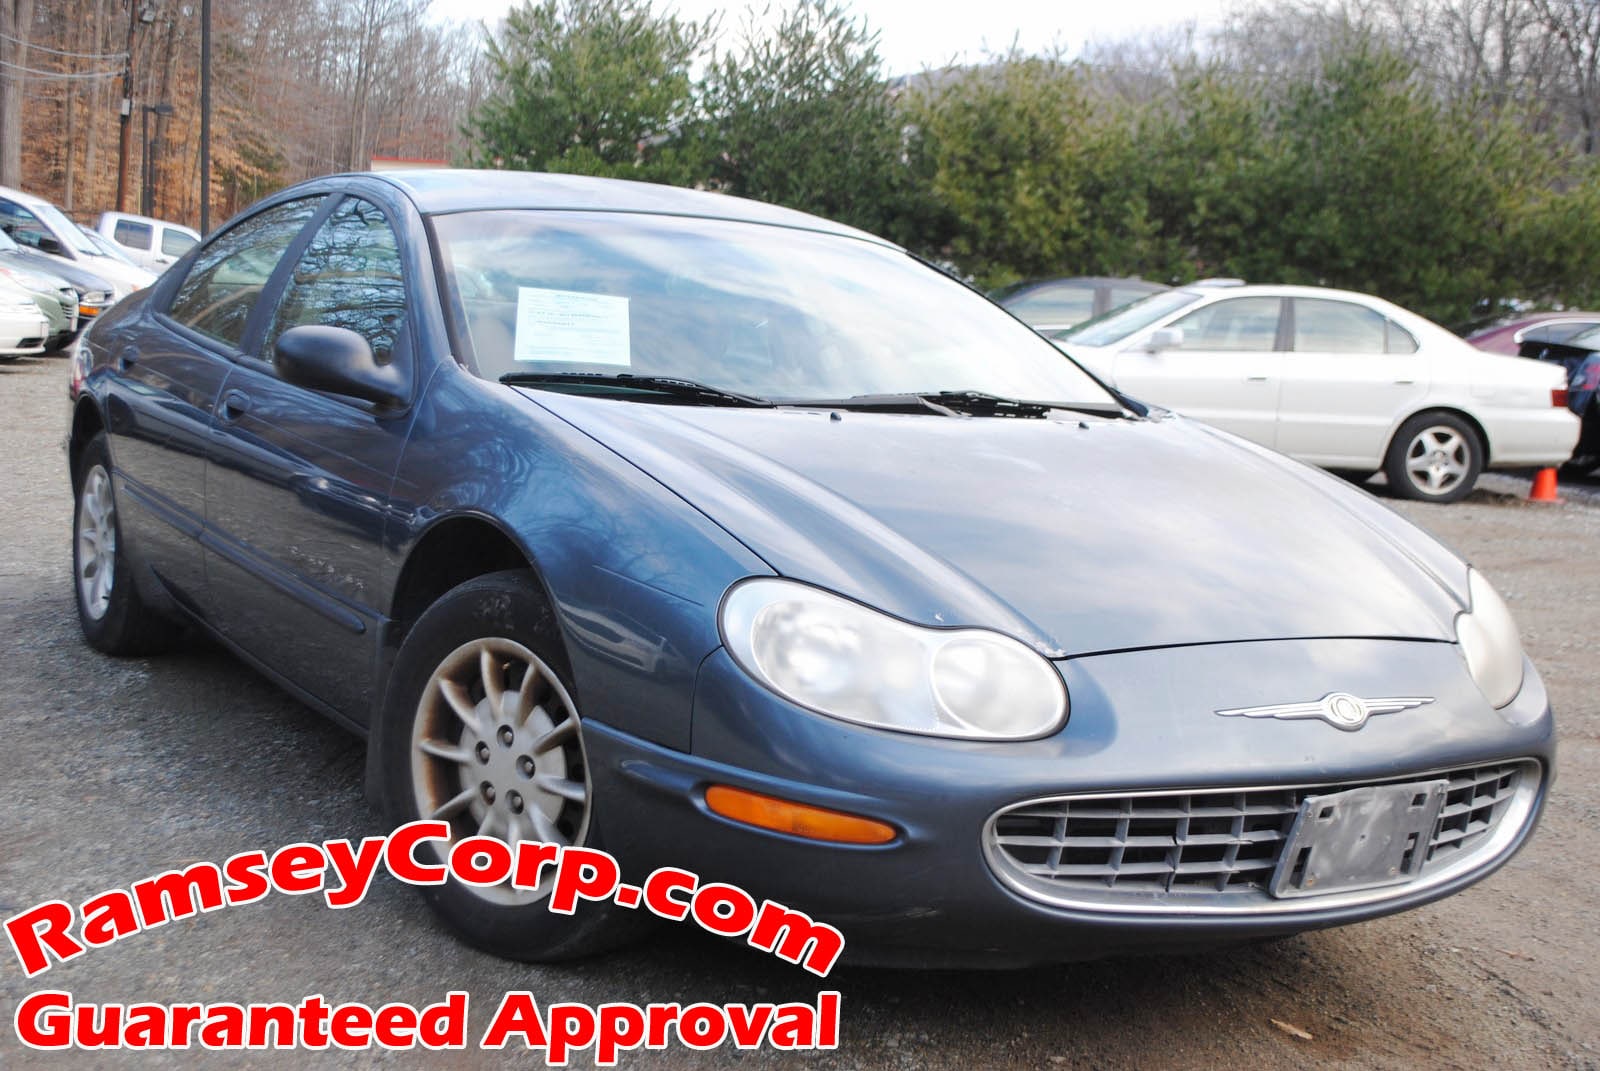 Used 2000 Chrysler Concorde For Sale at Ramsey Corp. | VIN:  2C3HD46R4YH359724